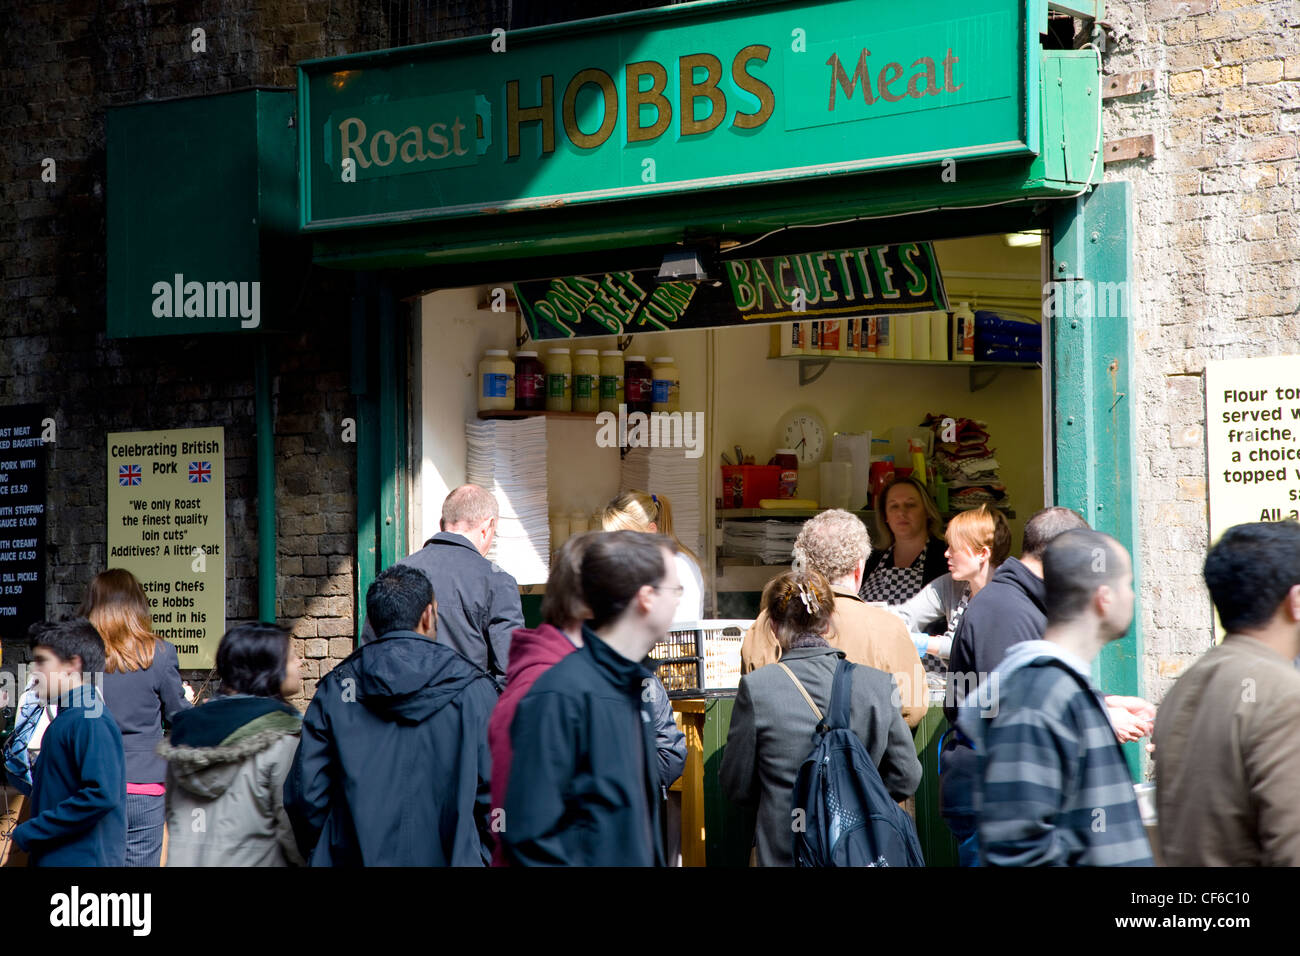 A busy scene with a sandwich shop selling traditional roast meat in Borough Market. Stock Photo